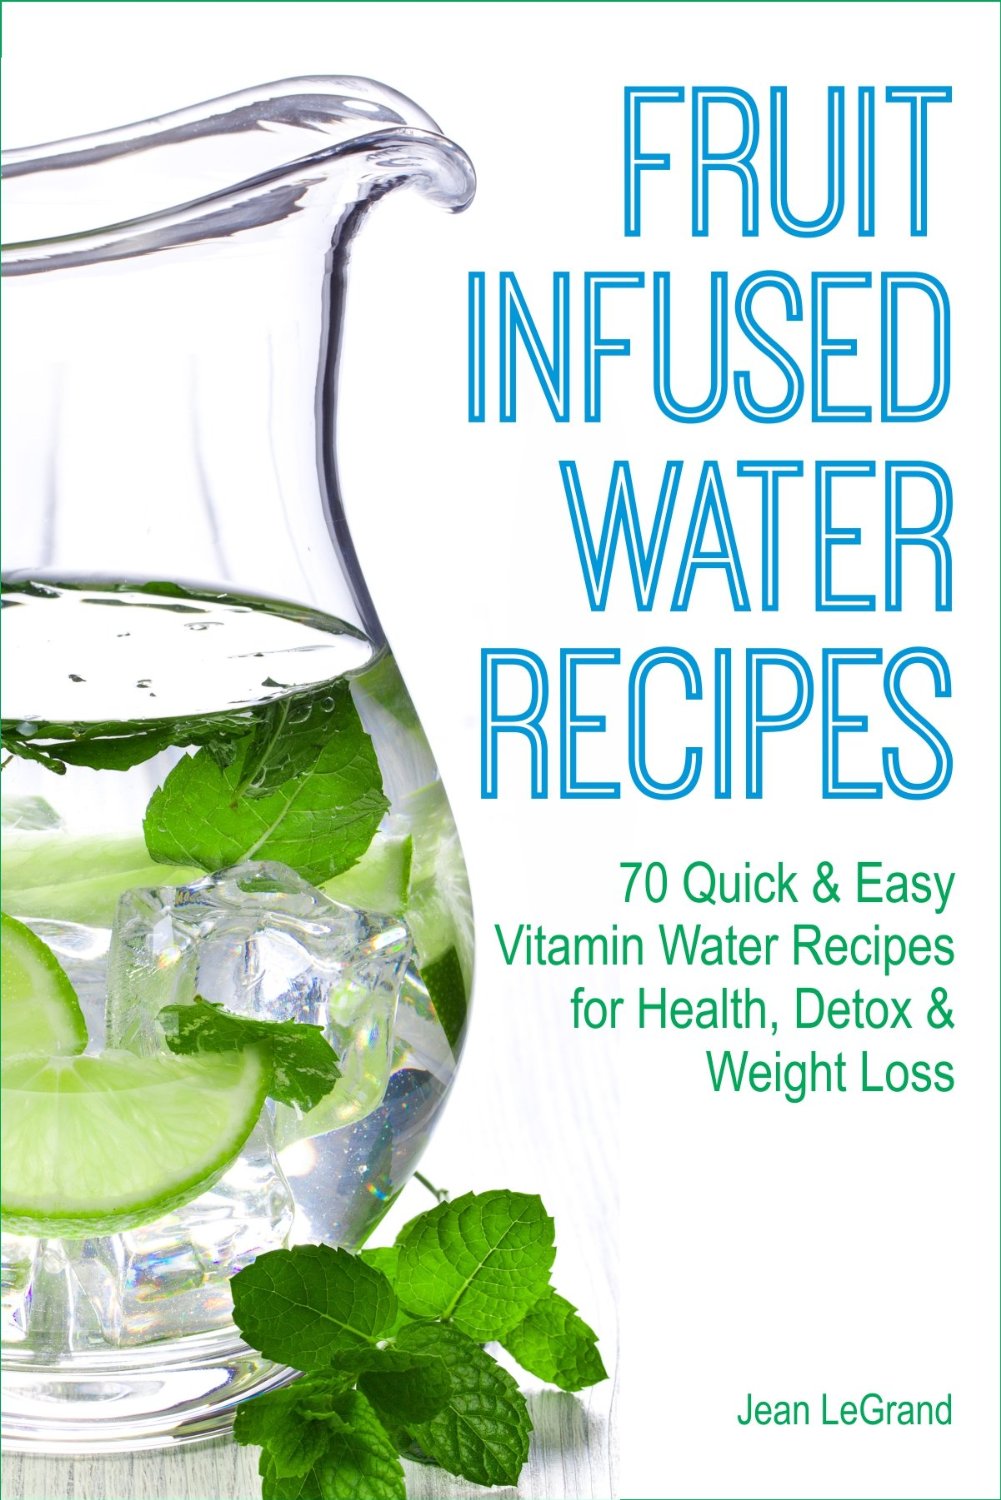 Fruit Infused Water Recipes – 70 Quick & Easy Vitamin Water Recipes for Health, Detox & Weight Loss by Jean LeGrand